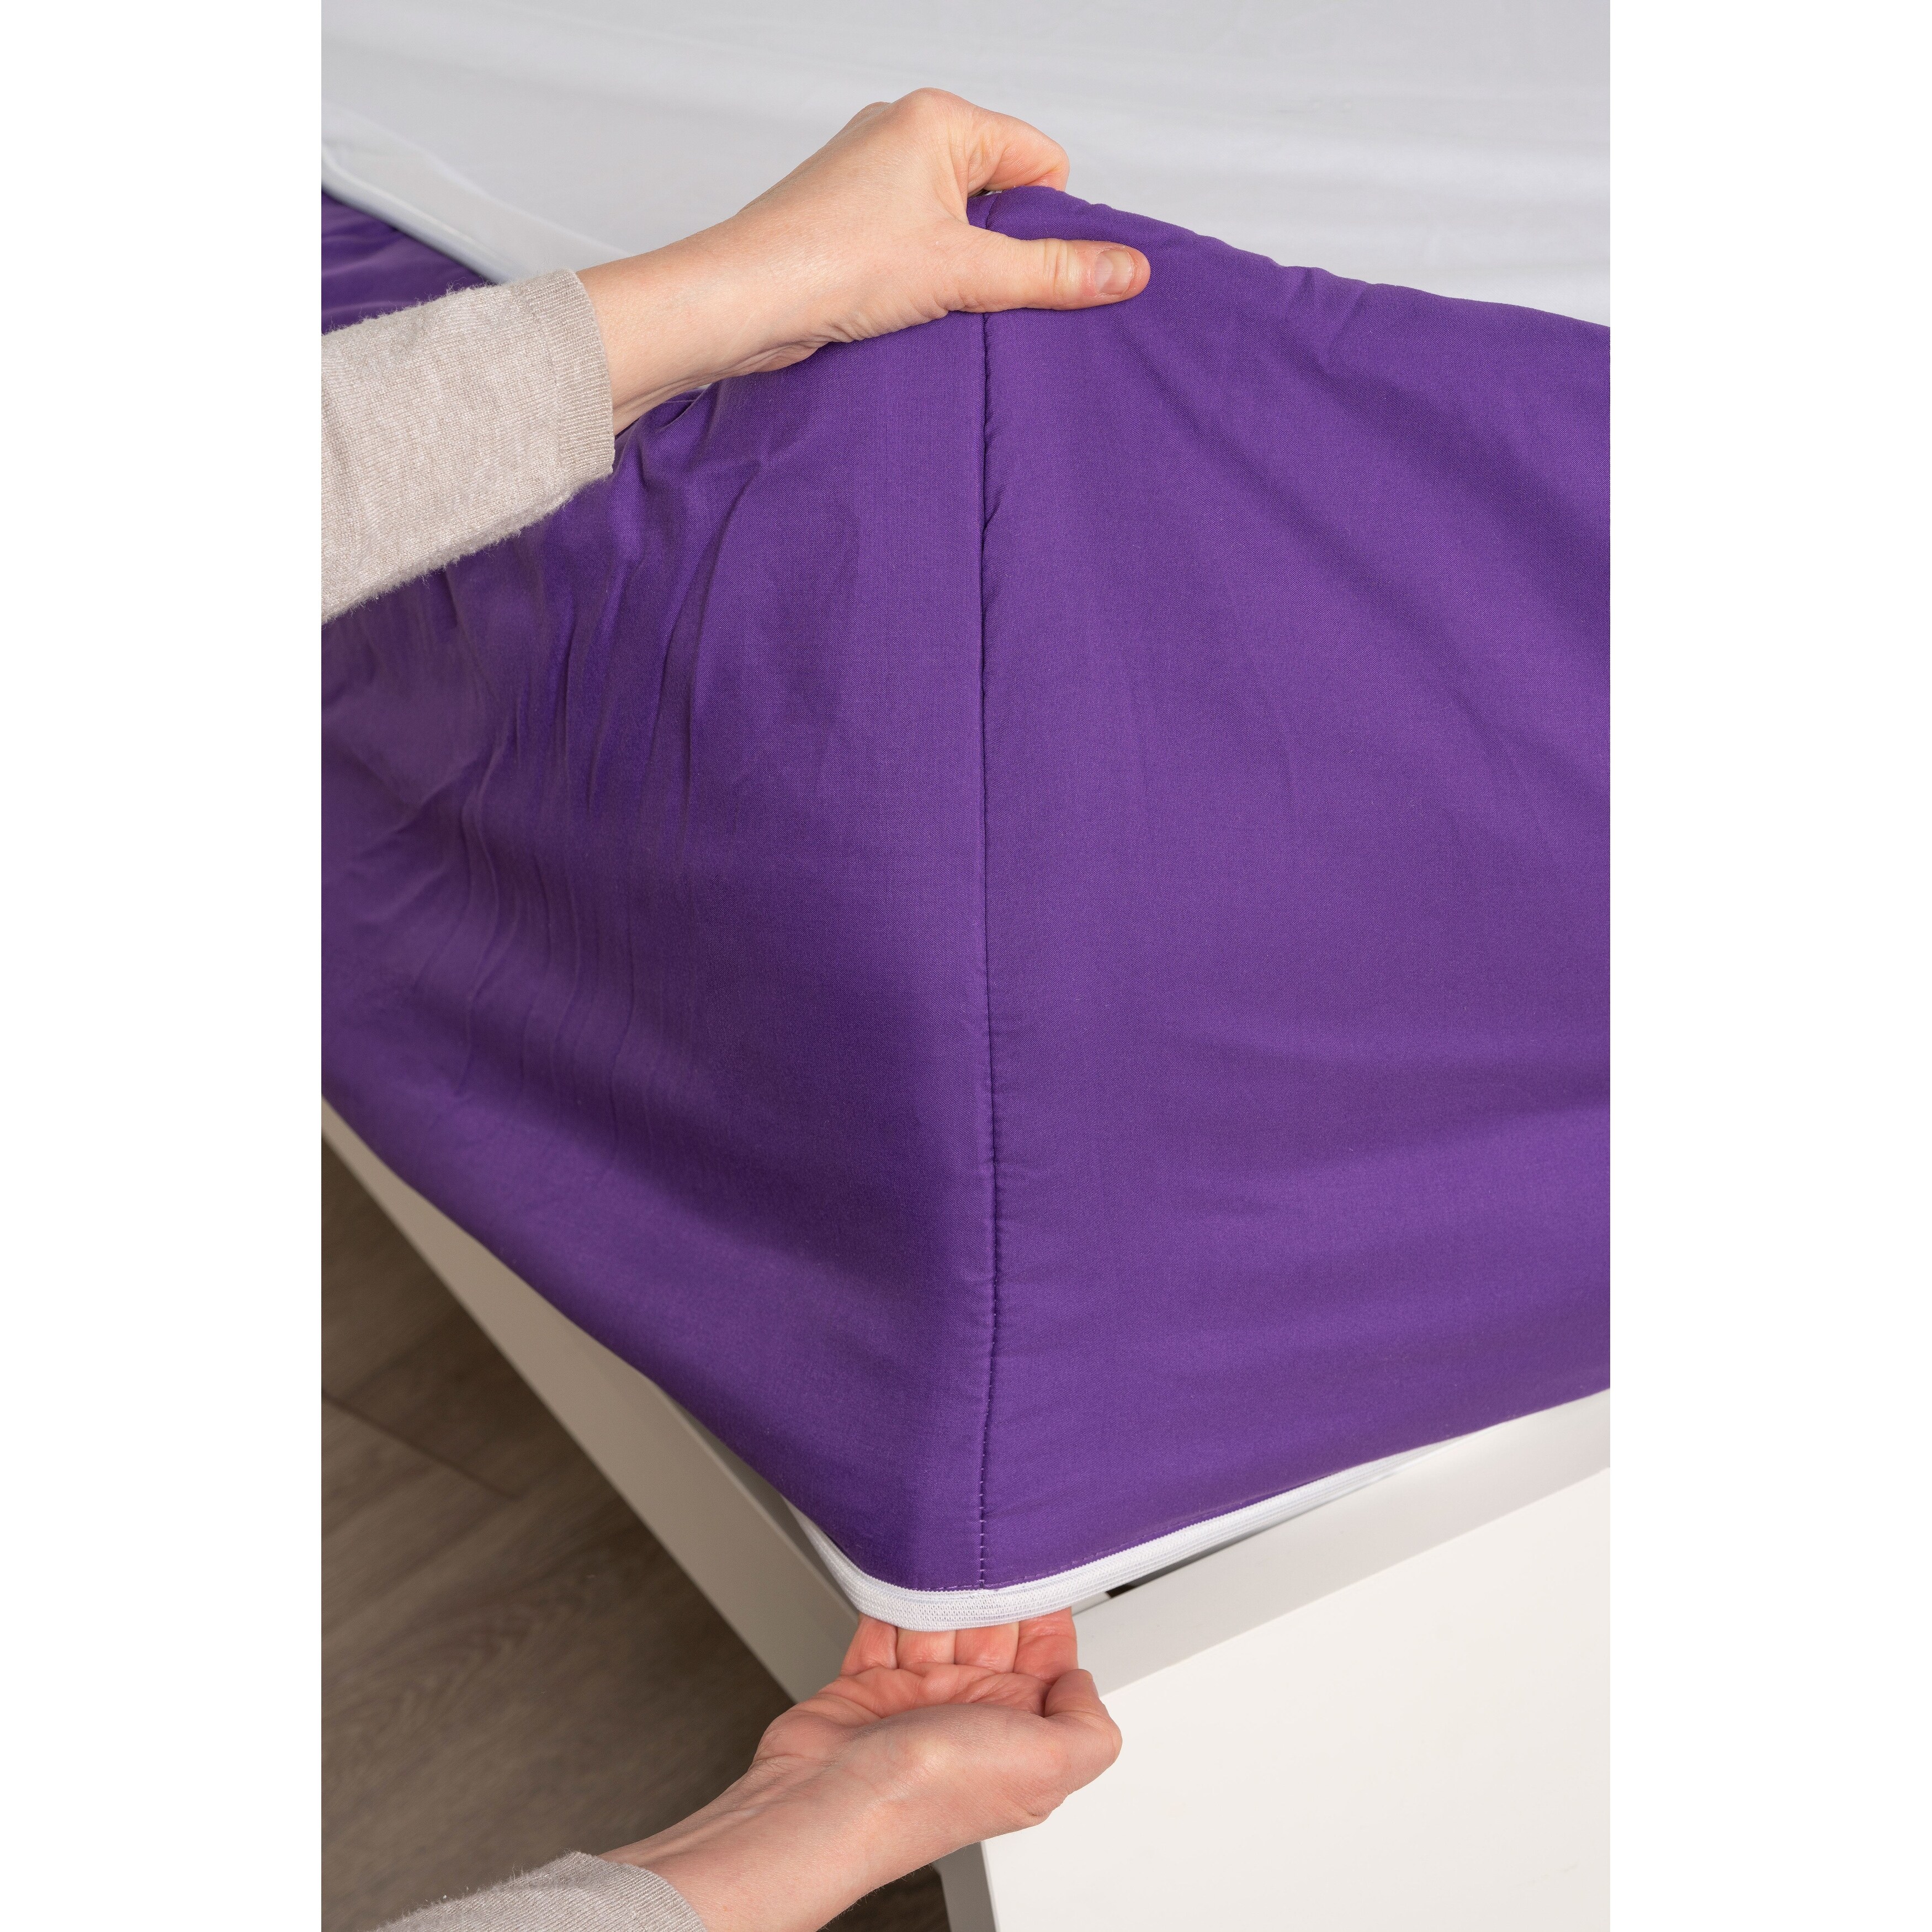 https://ak1.ostkcdn.com/images/products/is/images/direct/bfc2d4ed54cc884f7e163585bba1e041a73ab227/Siscovers-Purple-Bunkie-Deluxe-Zipper-Bedding-Set.jpg